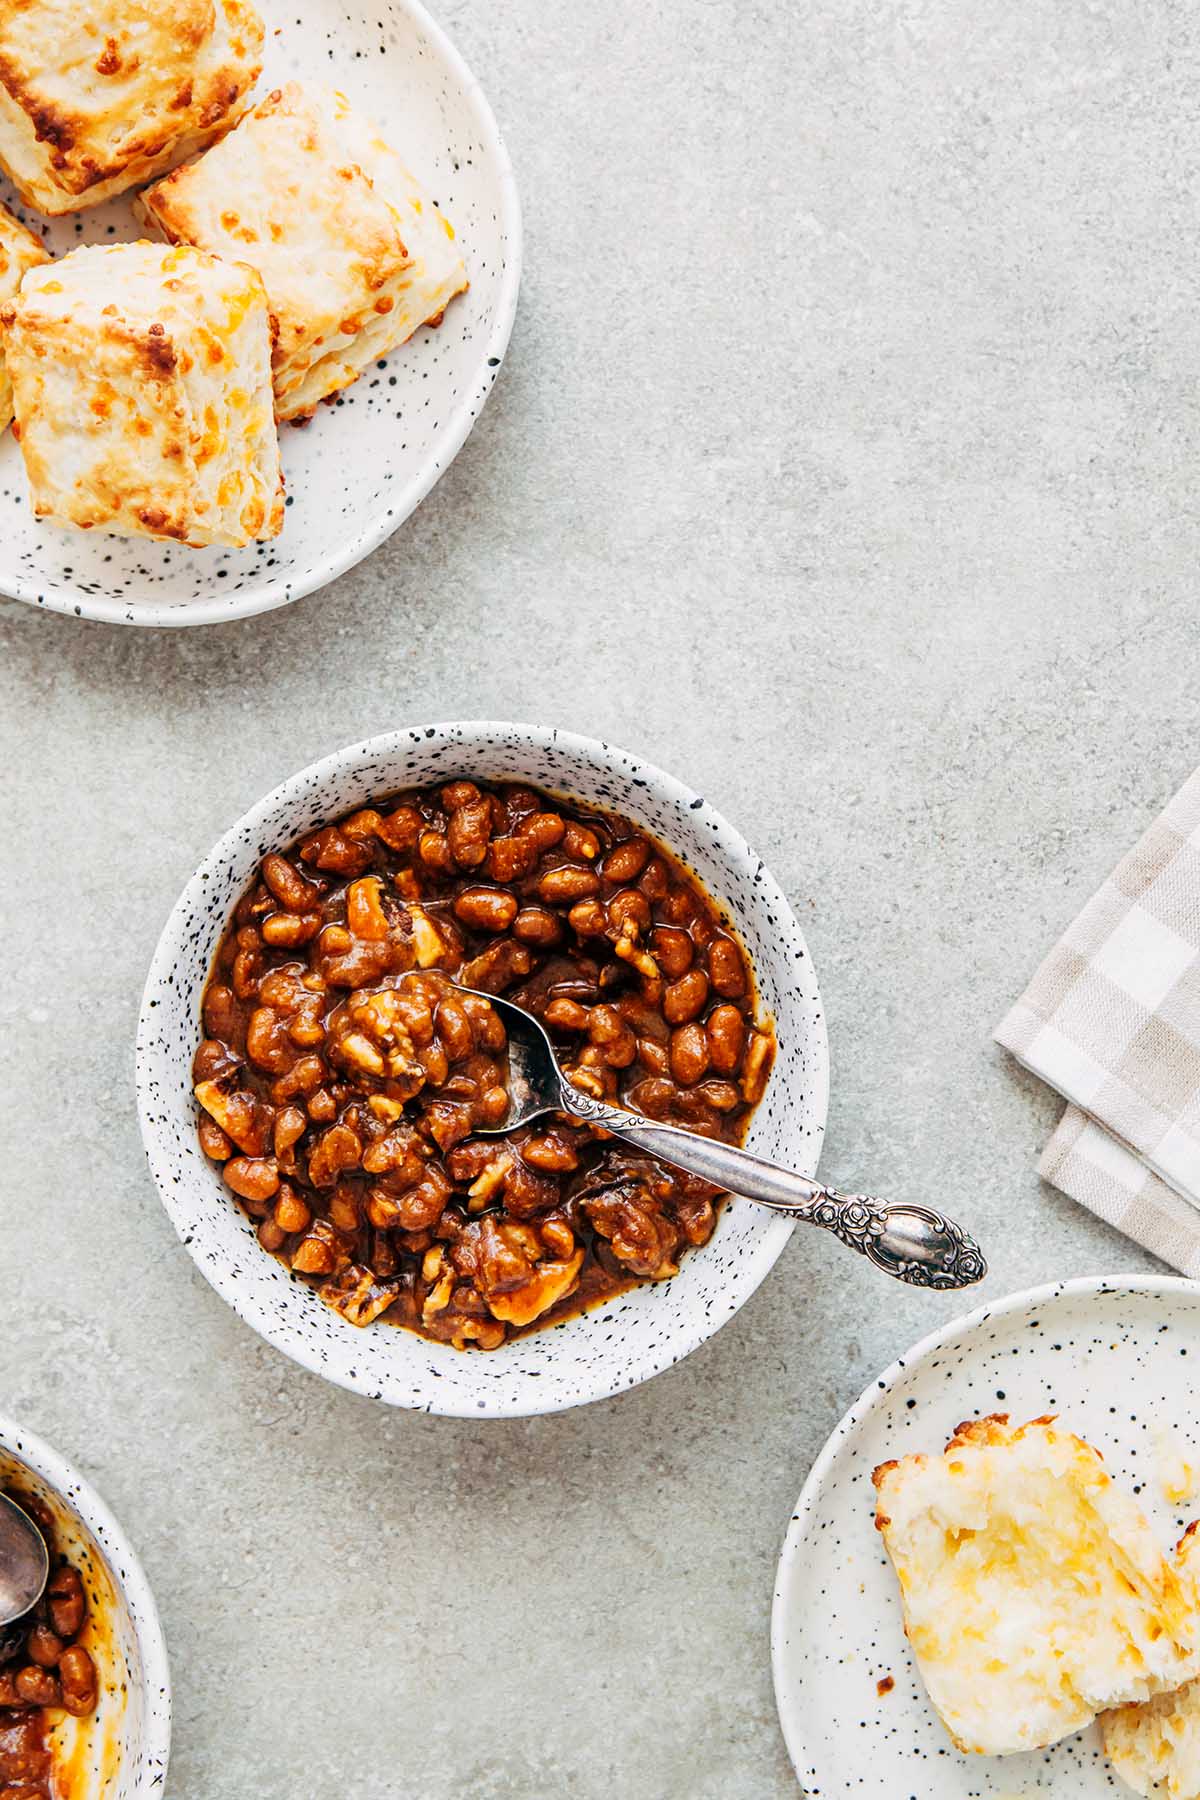 Bowls of homemade molasses baked beans and plates of cheese tea biscuits on the side.